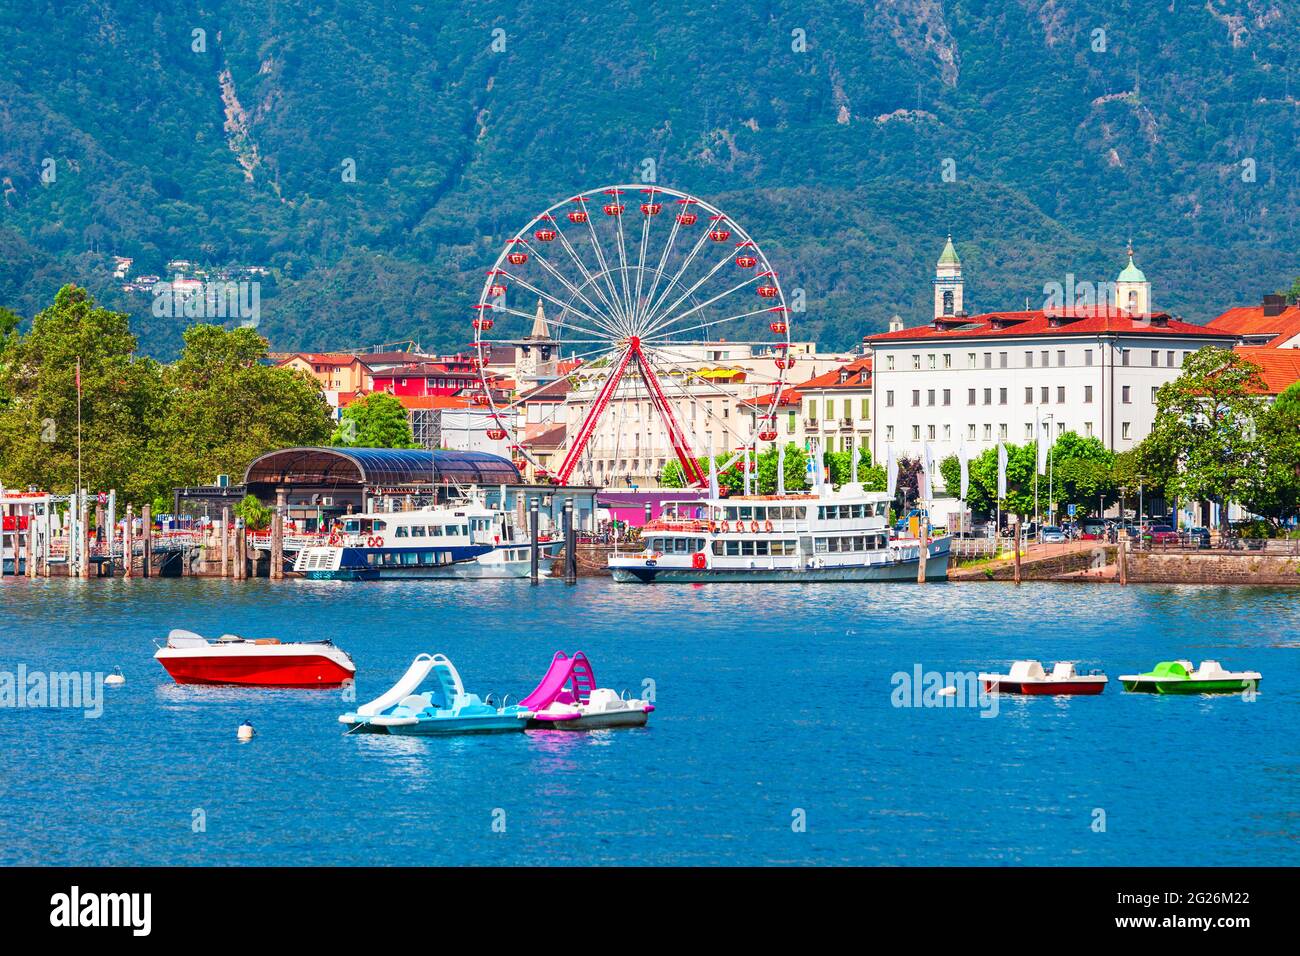 Locarno port with yacht and boats. Locarno is a town located on Lake  Maggiore in Ticino canton of Switzerland Stock Photo - Alamy